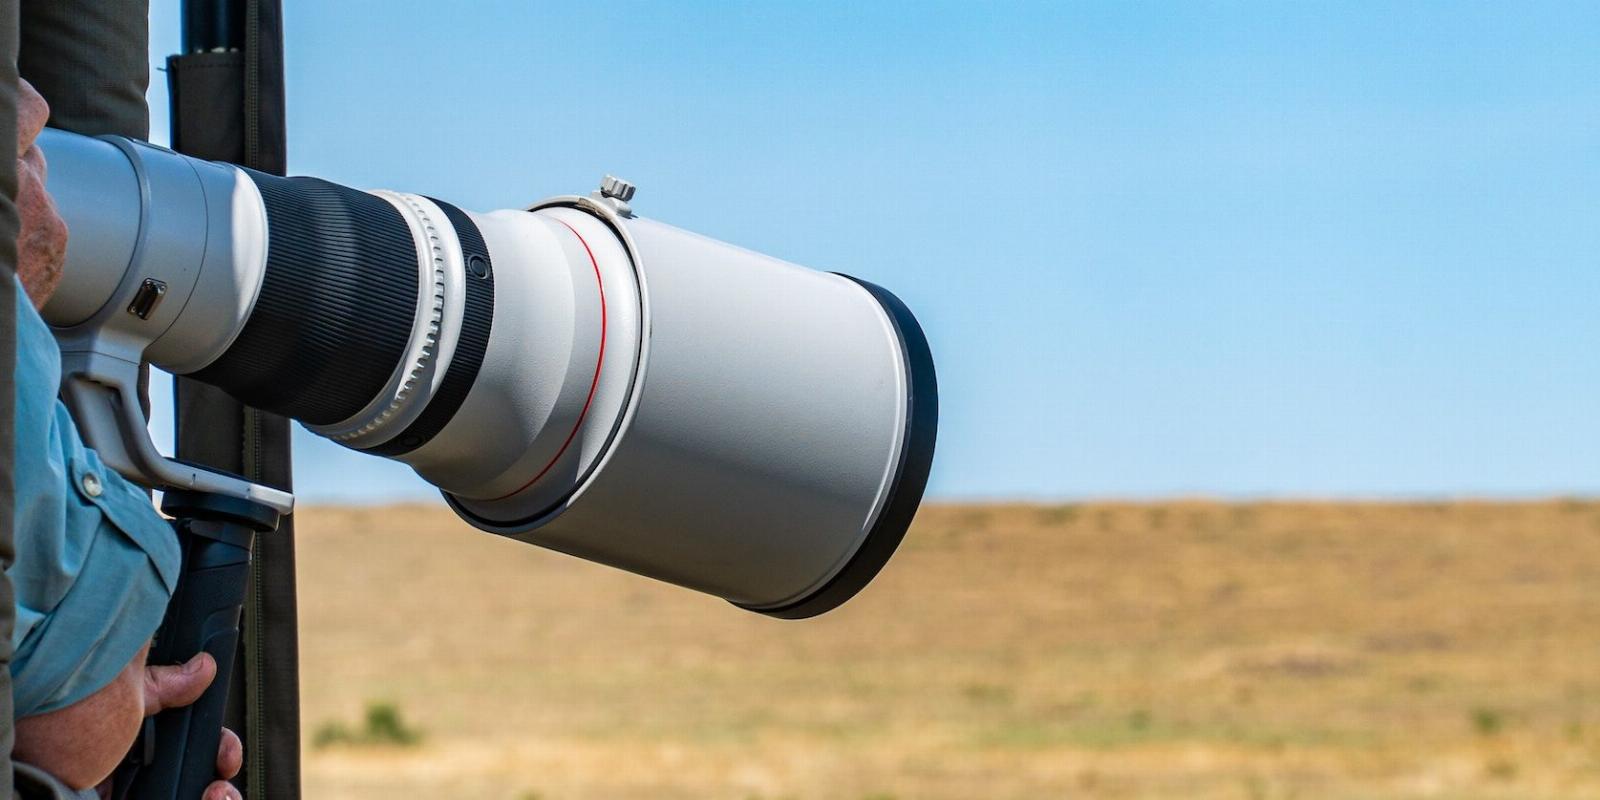 How to Use Your Telephoto Lens Effectively: 8 Tips